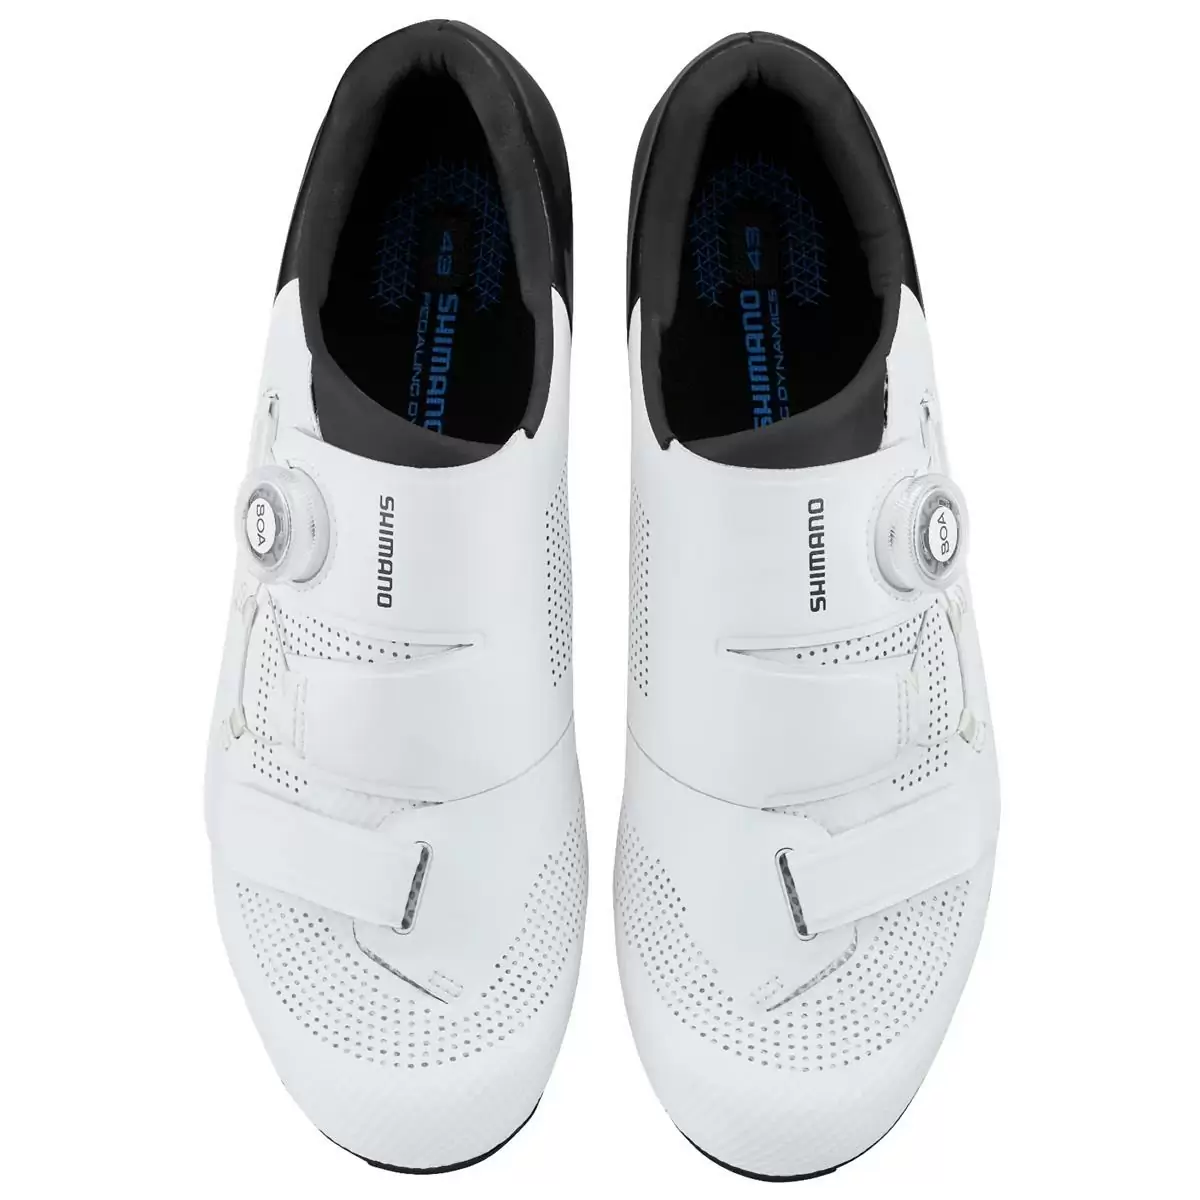 Chaussures route RC SH-RC502 Blanc taille 44 #1